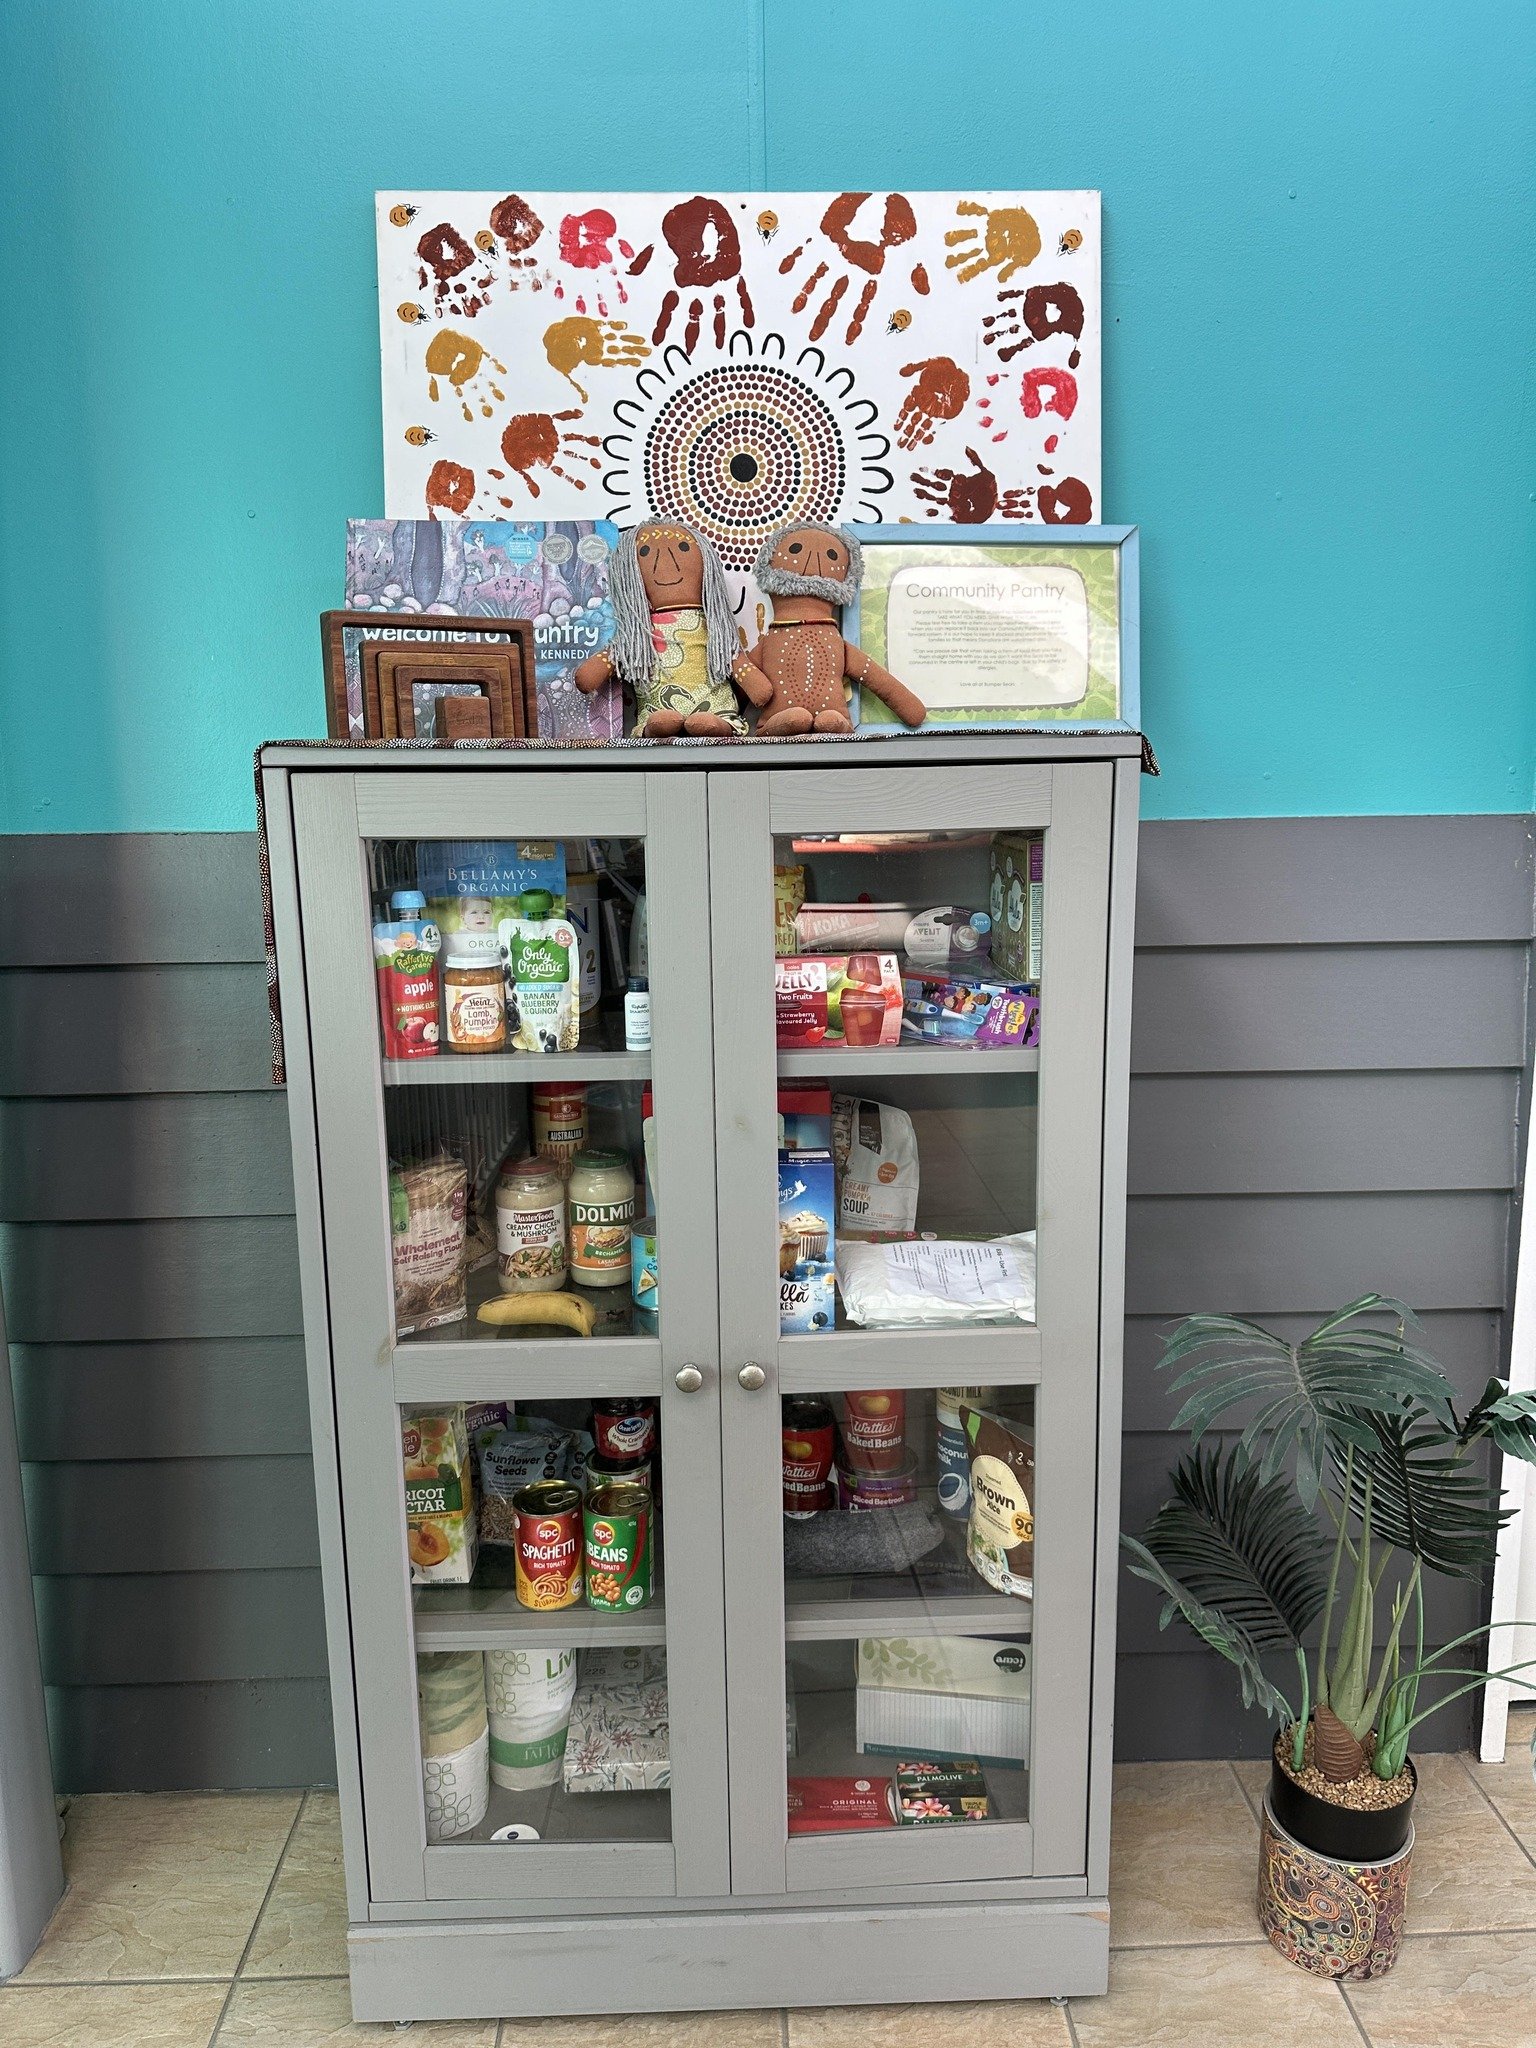 Have you seen our Community Pantry? This is a place where you can add items for families that need them, or you can take items if you need them. We are all parents doing what we can with what we can. Community is everything, it takes a village. #Comm